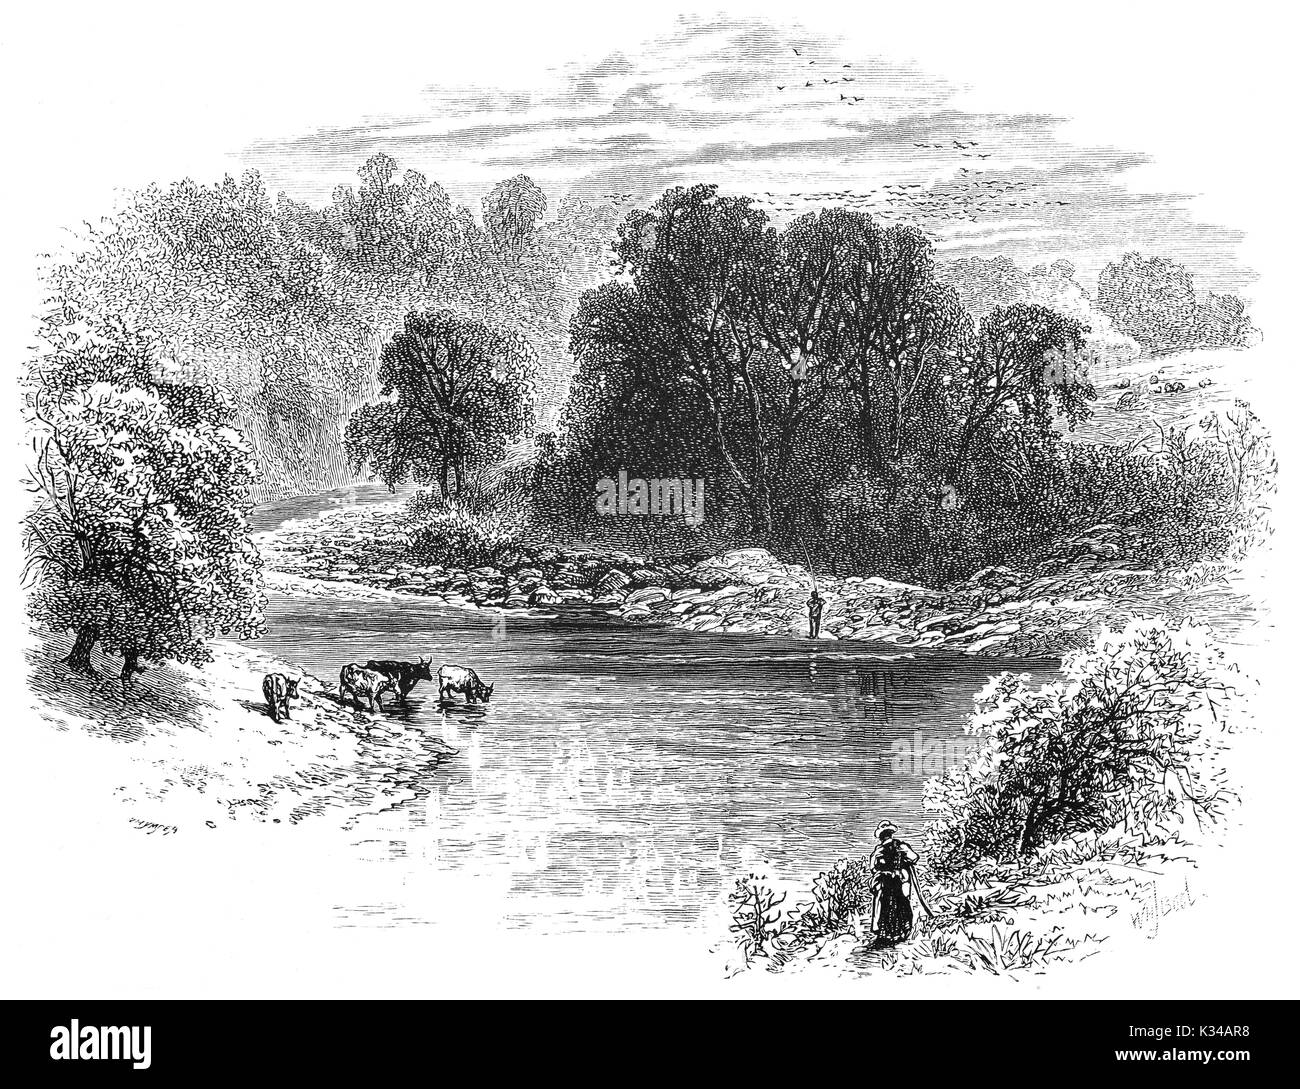 1870: Cattle drinking from the River Esk near Gilnockie, in Dumfries and Galloway, south-west Scotland. Stock Photo